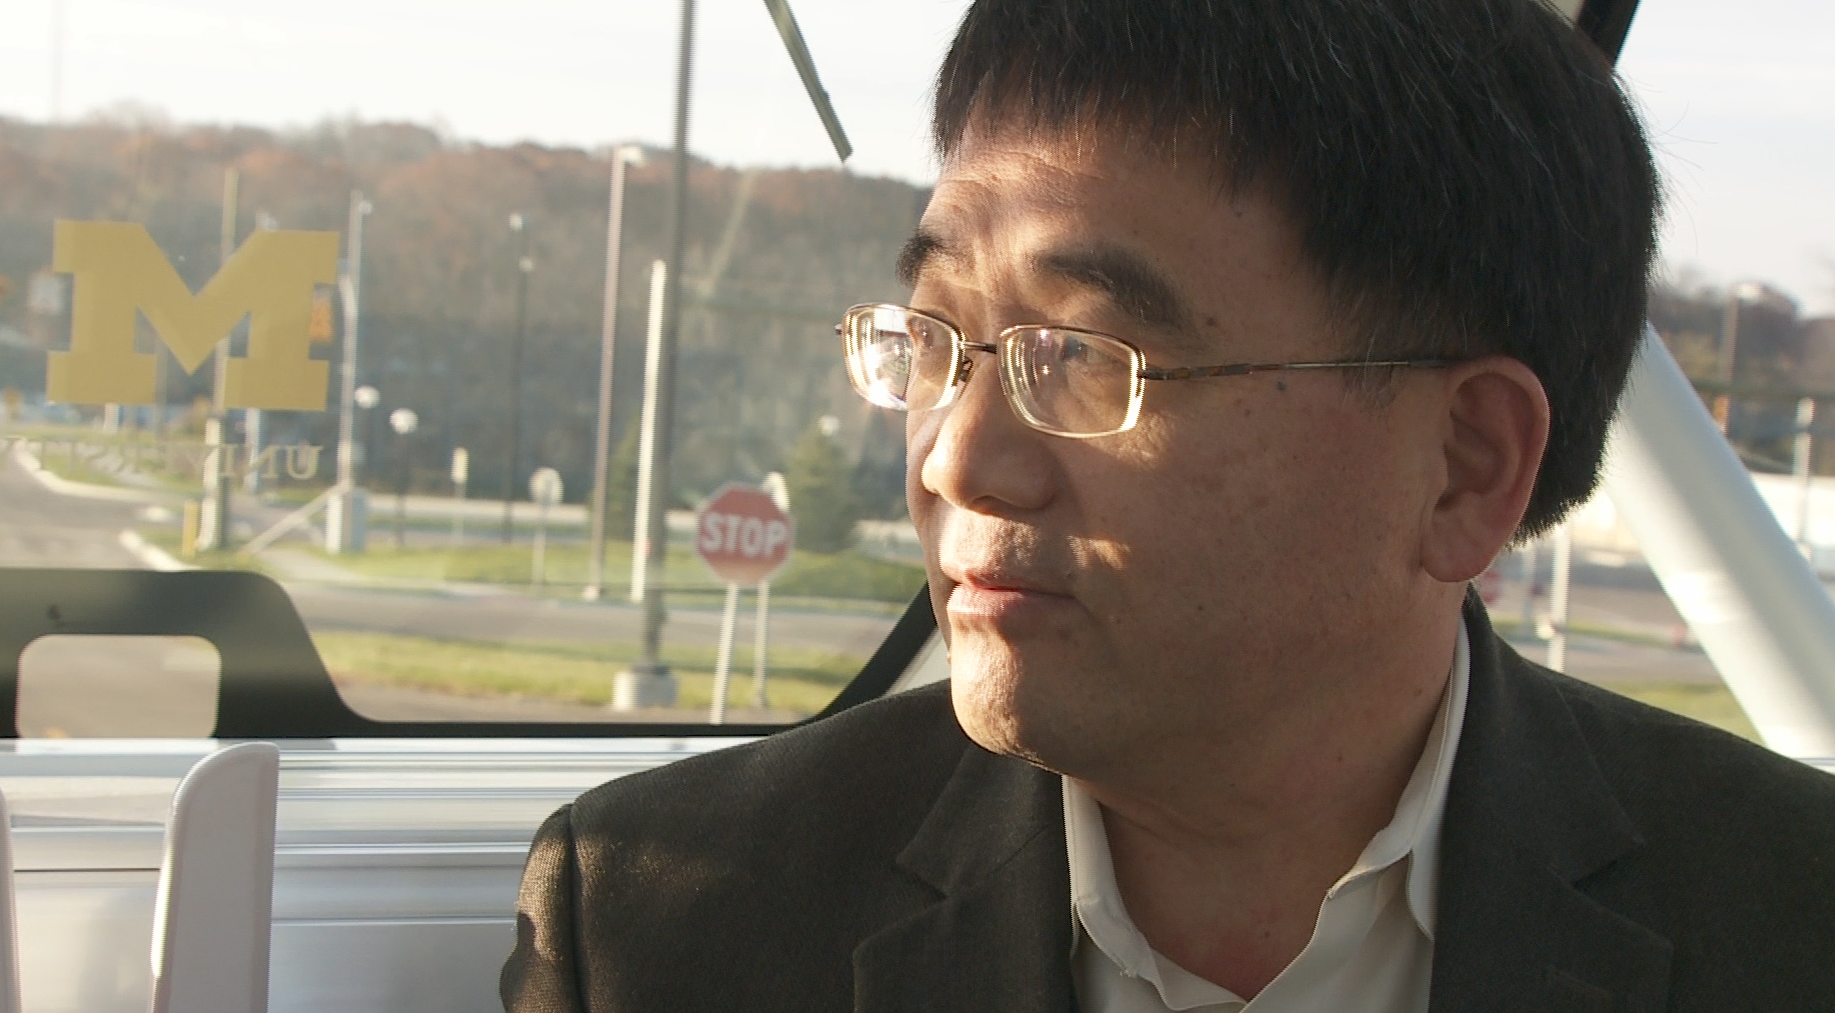 Huei Peng, director of the University of Michigan Mobility Transformation Center, discusses the impact of Mcity on autonomous vehicle testing. (credit: Paul Pytlowany/CBS 62)